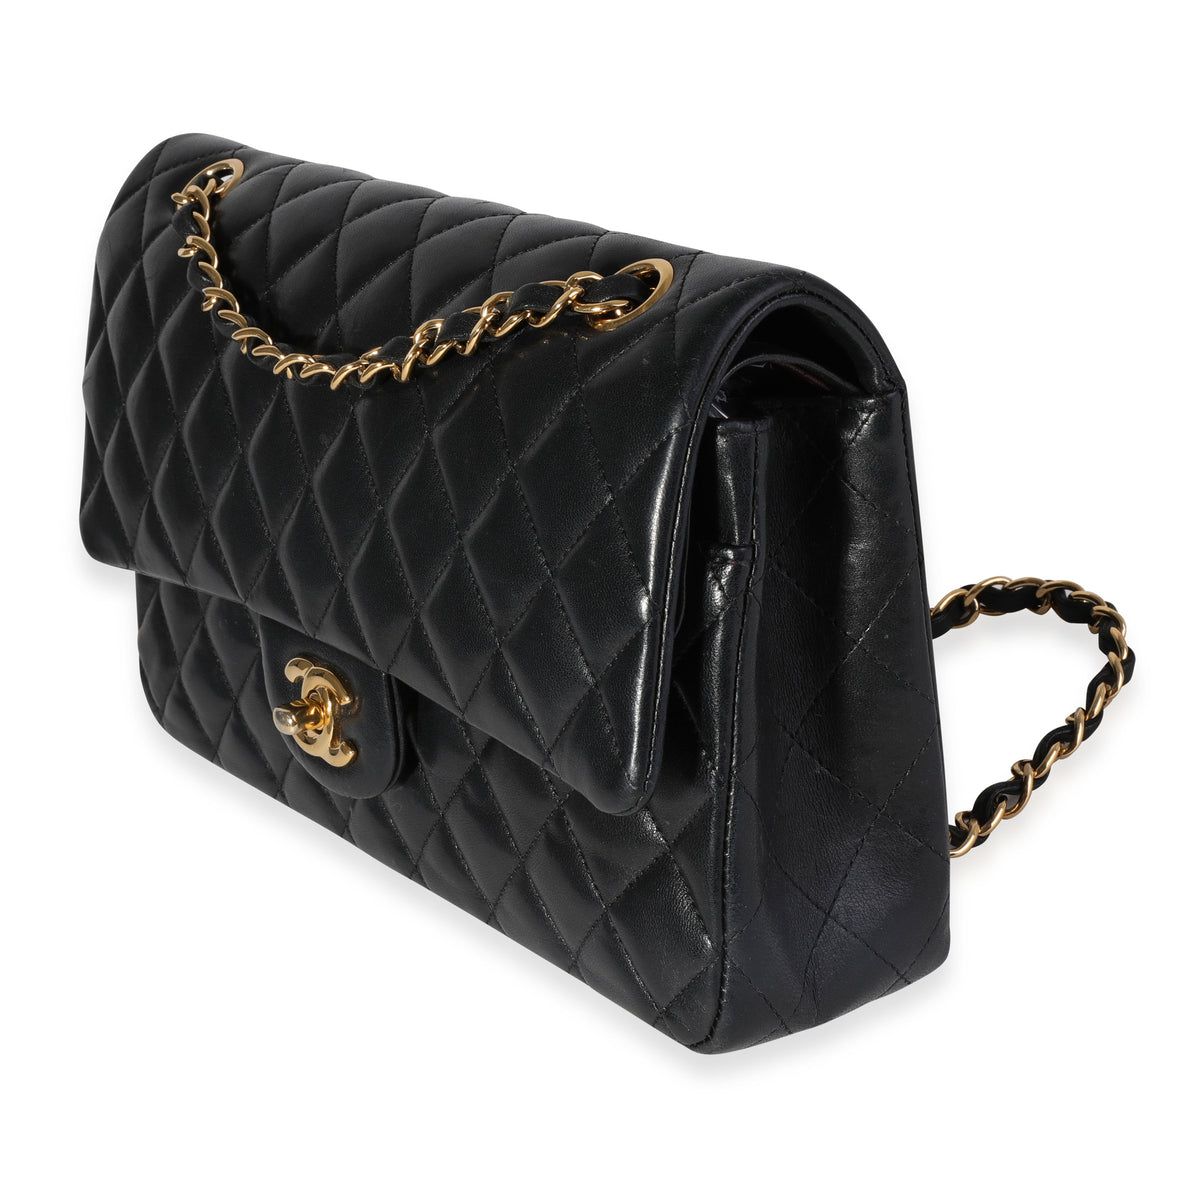 Chanel Black Quilted Lambskin Medium Classic Double Flap Bag, myGemma